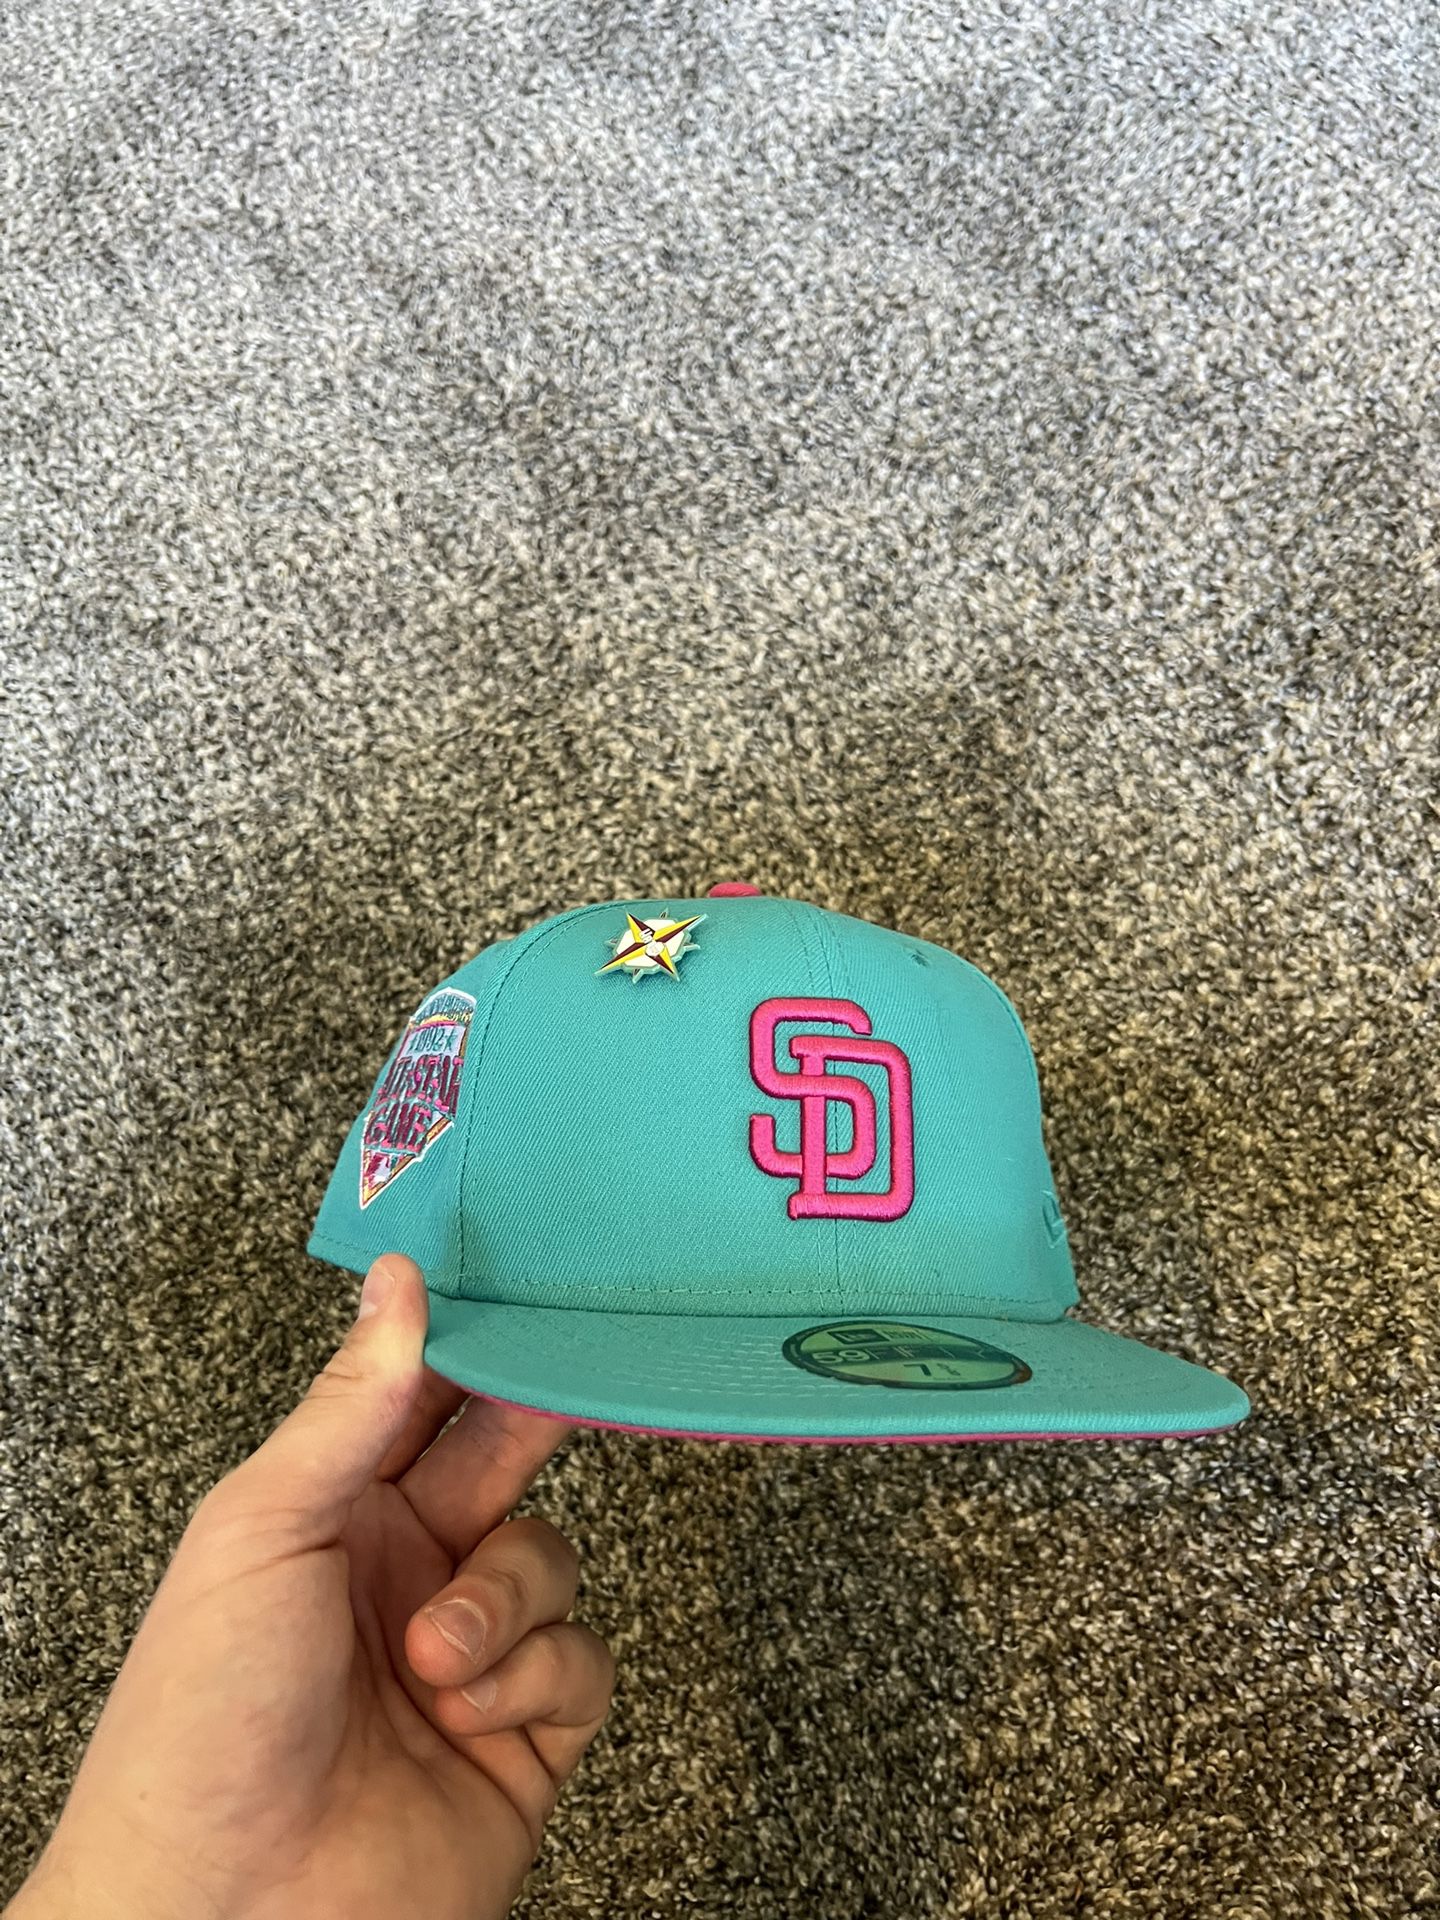 padres city connect for sale